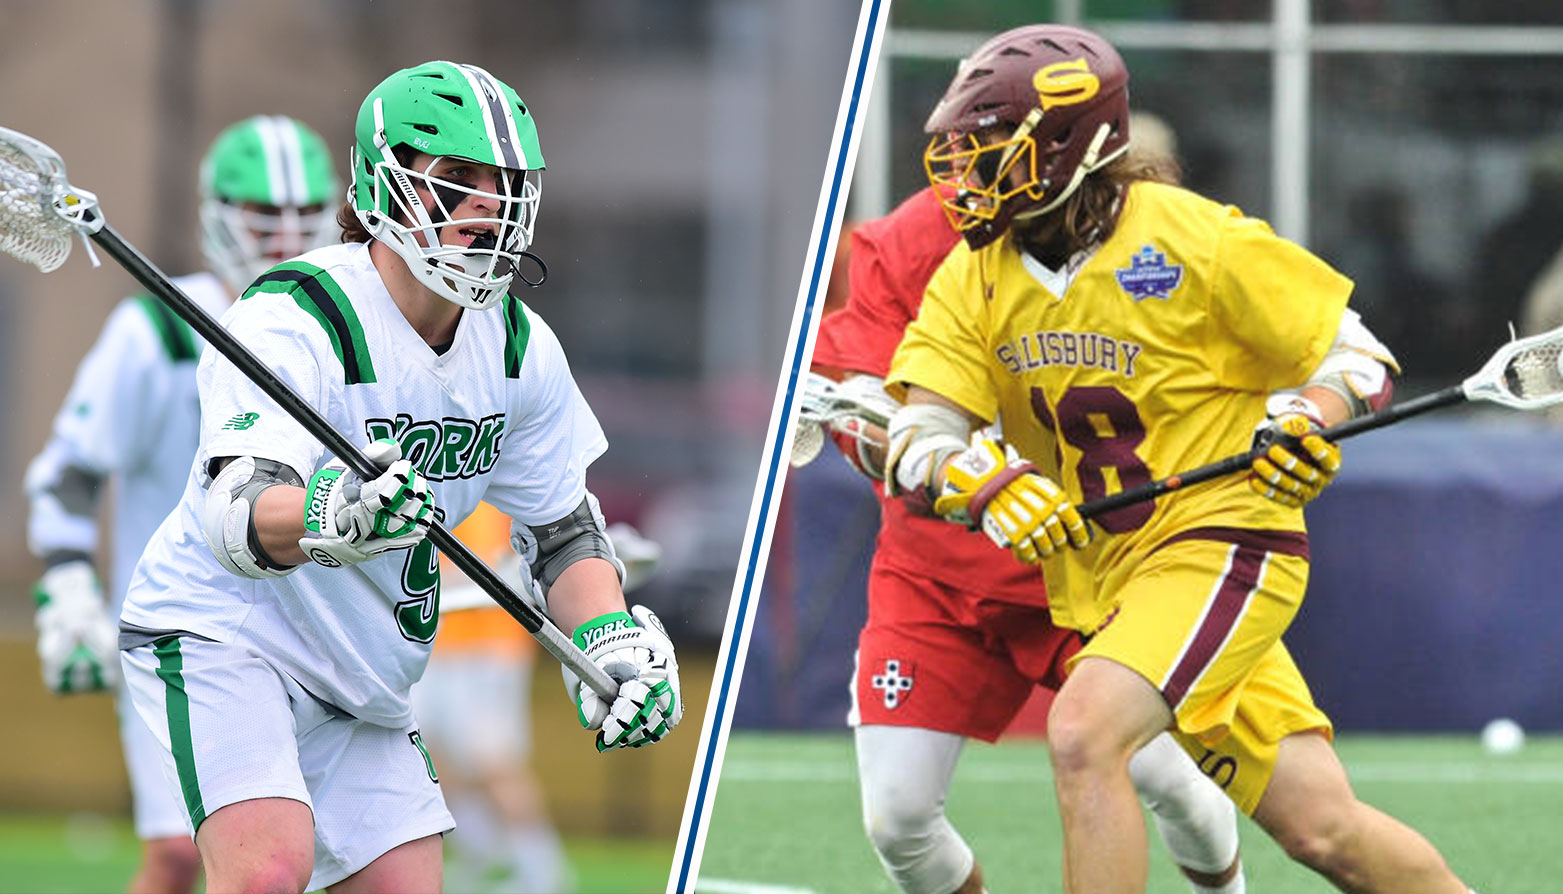 Salisbury's Corey Gwin & York's Kevin Witchey Earn CAC Men's Lacrosse Weekly Accolades